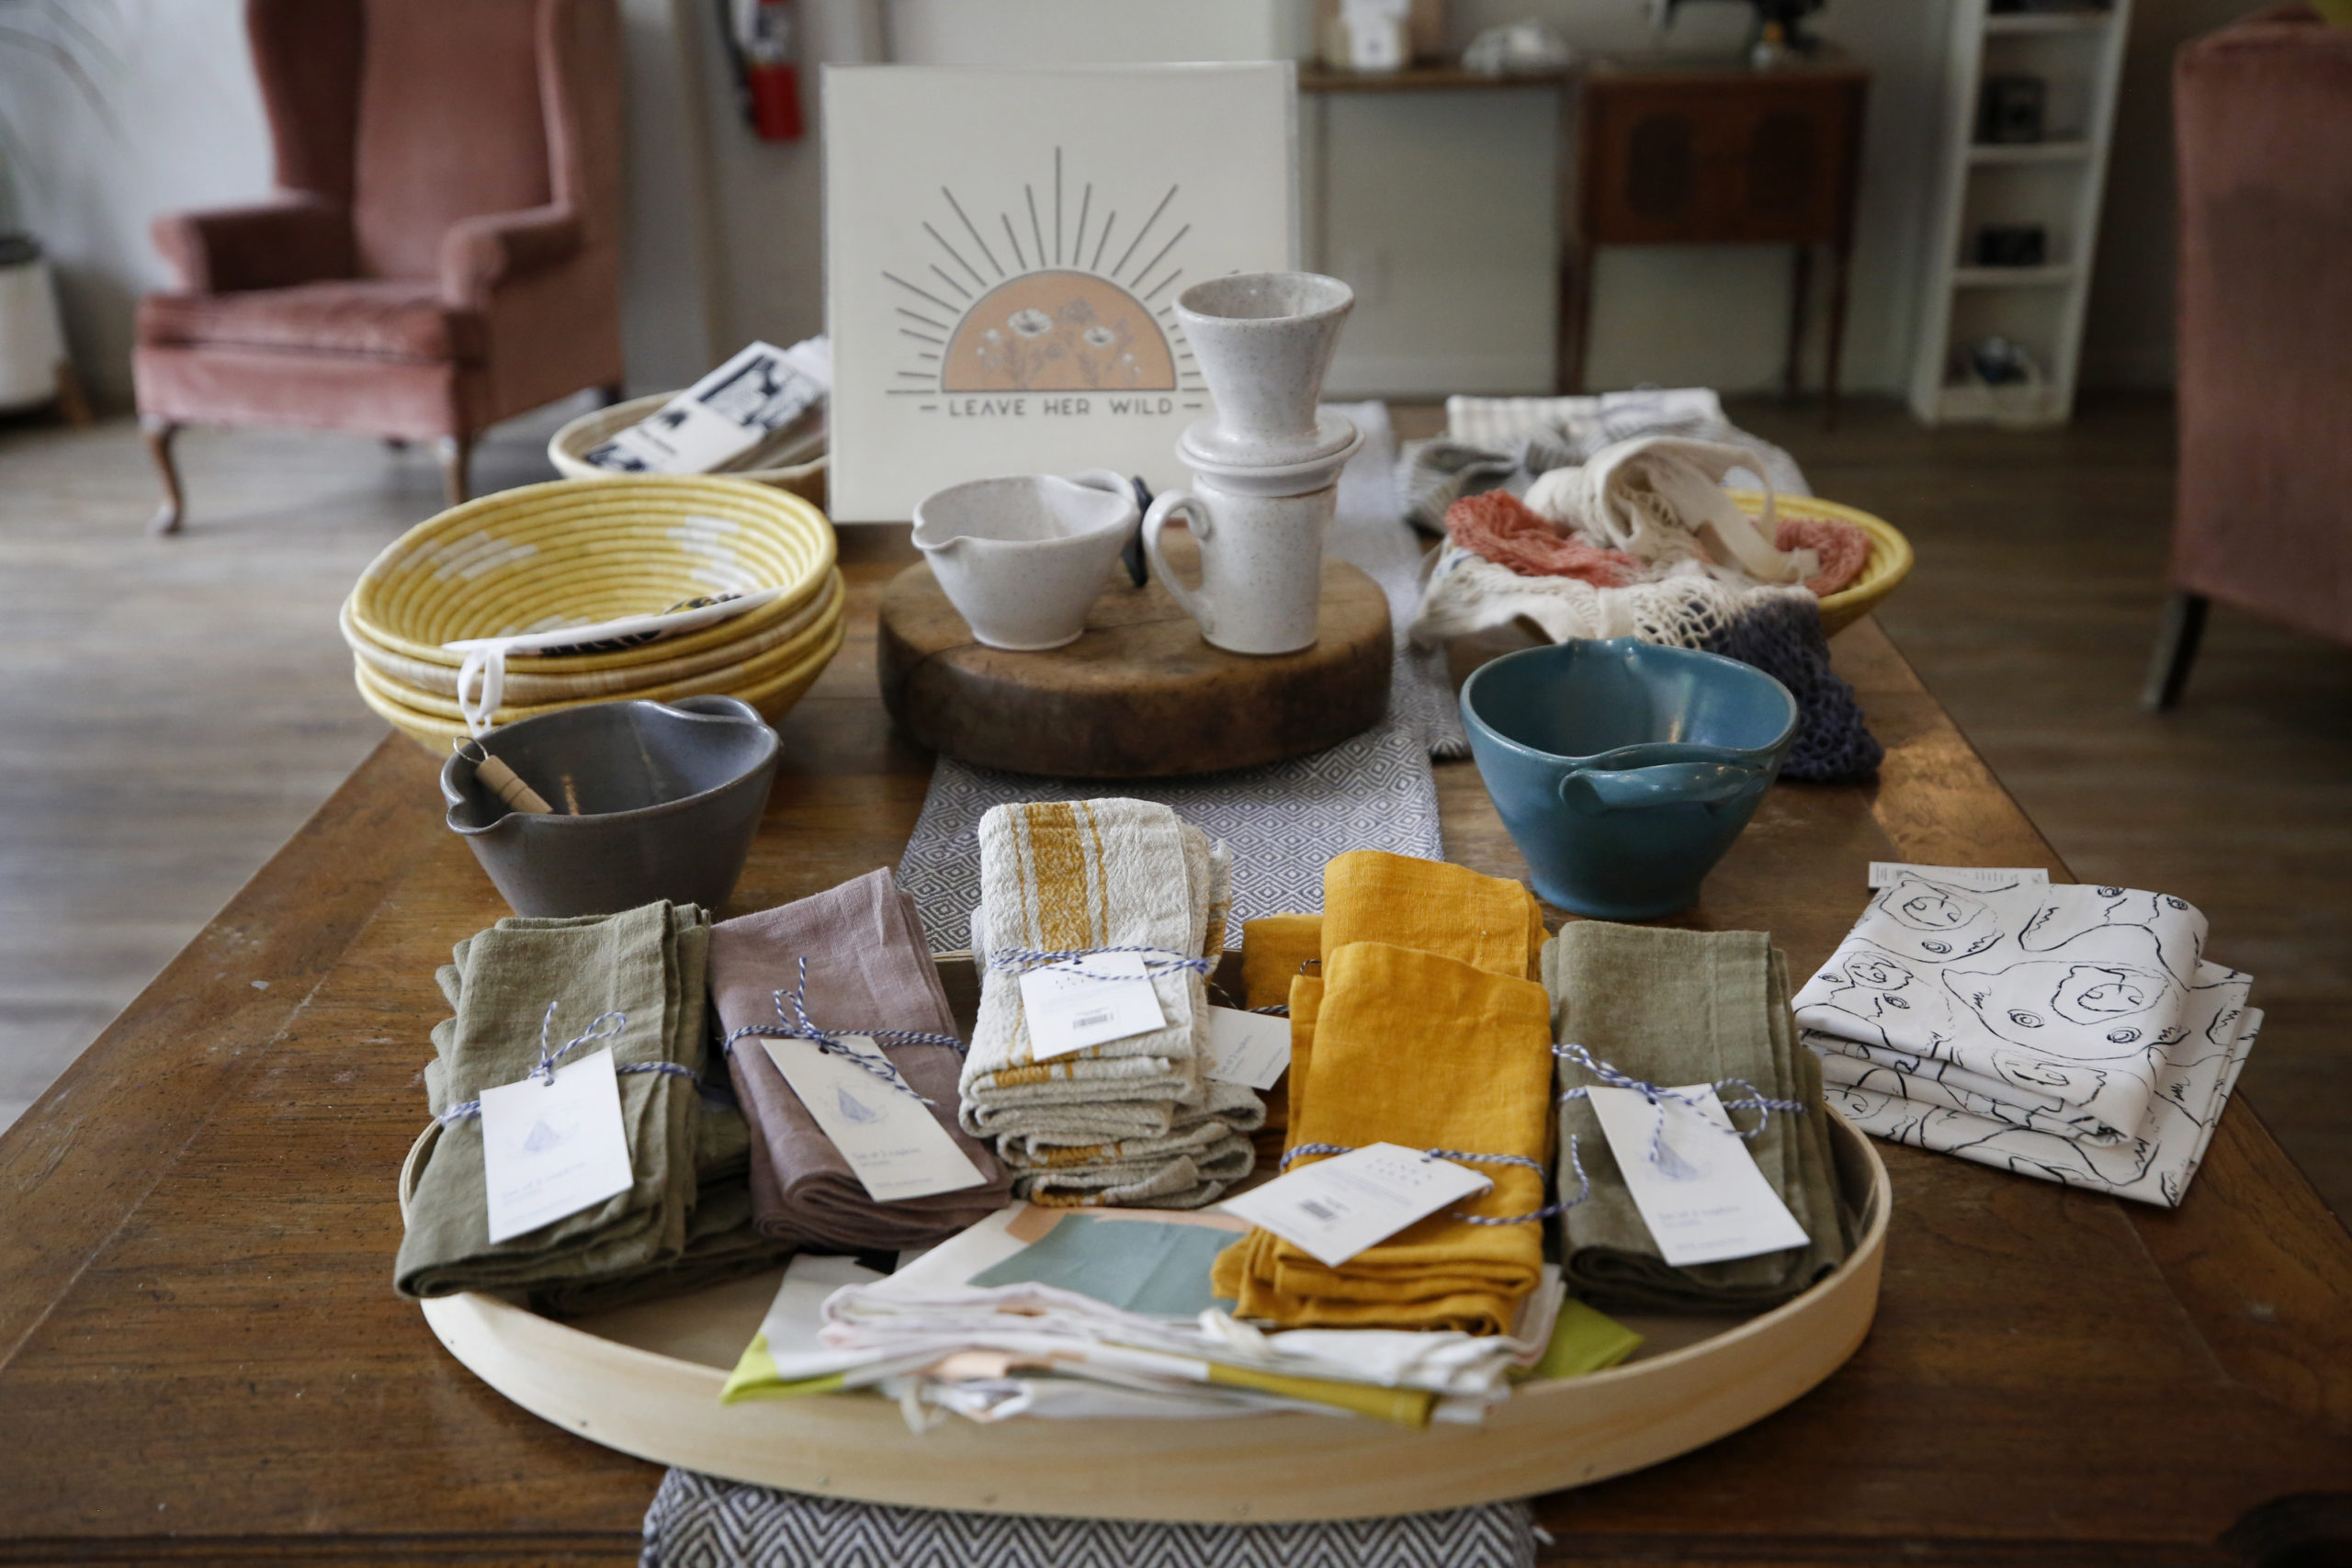 Linen napkins and handmade wares for sale at The Altamont General Store in Occidental. (Beth Schlanker/Sonoma Magazine)